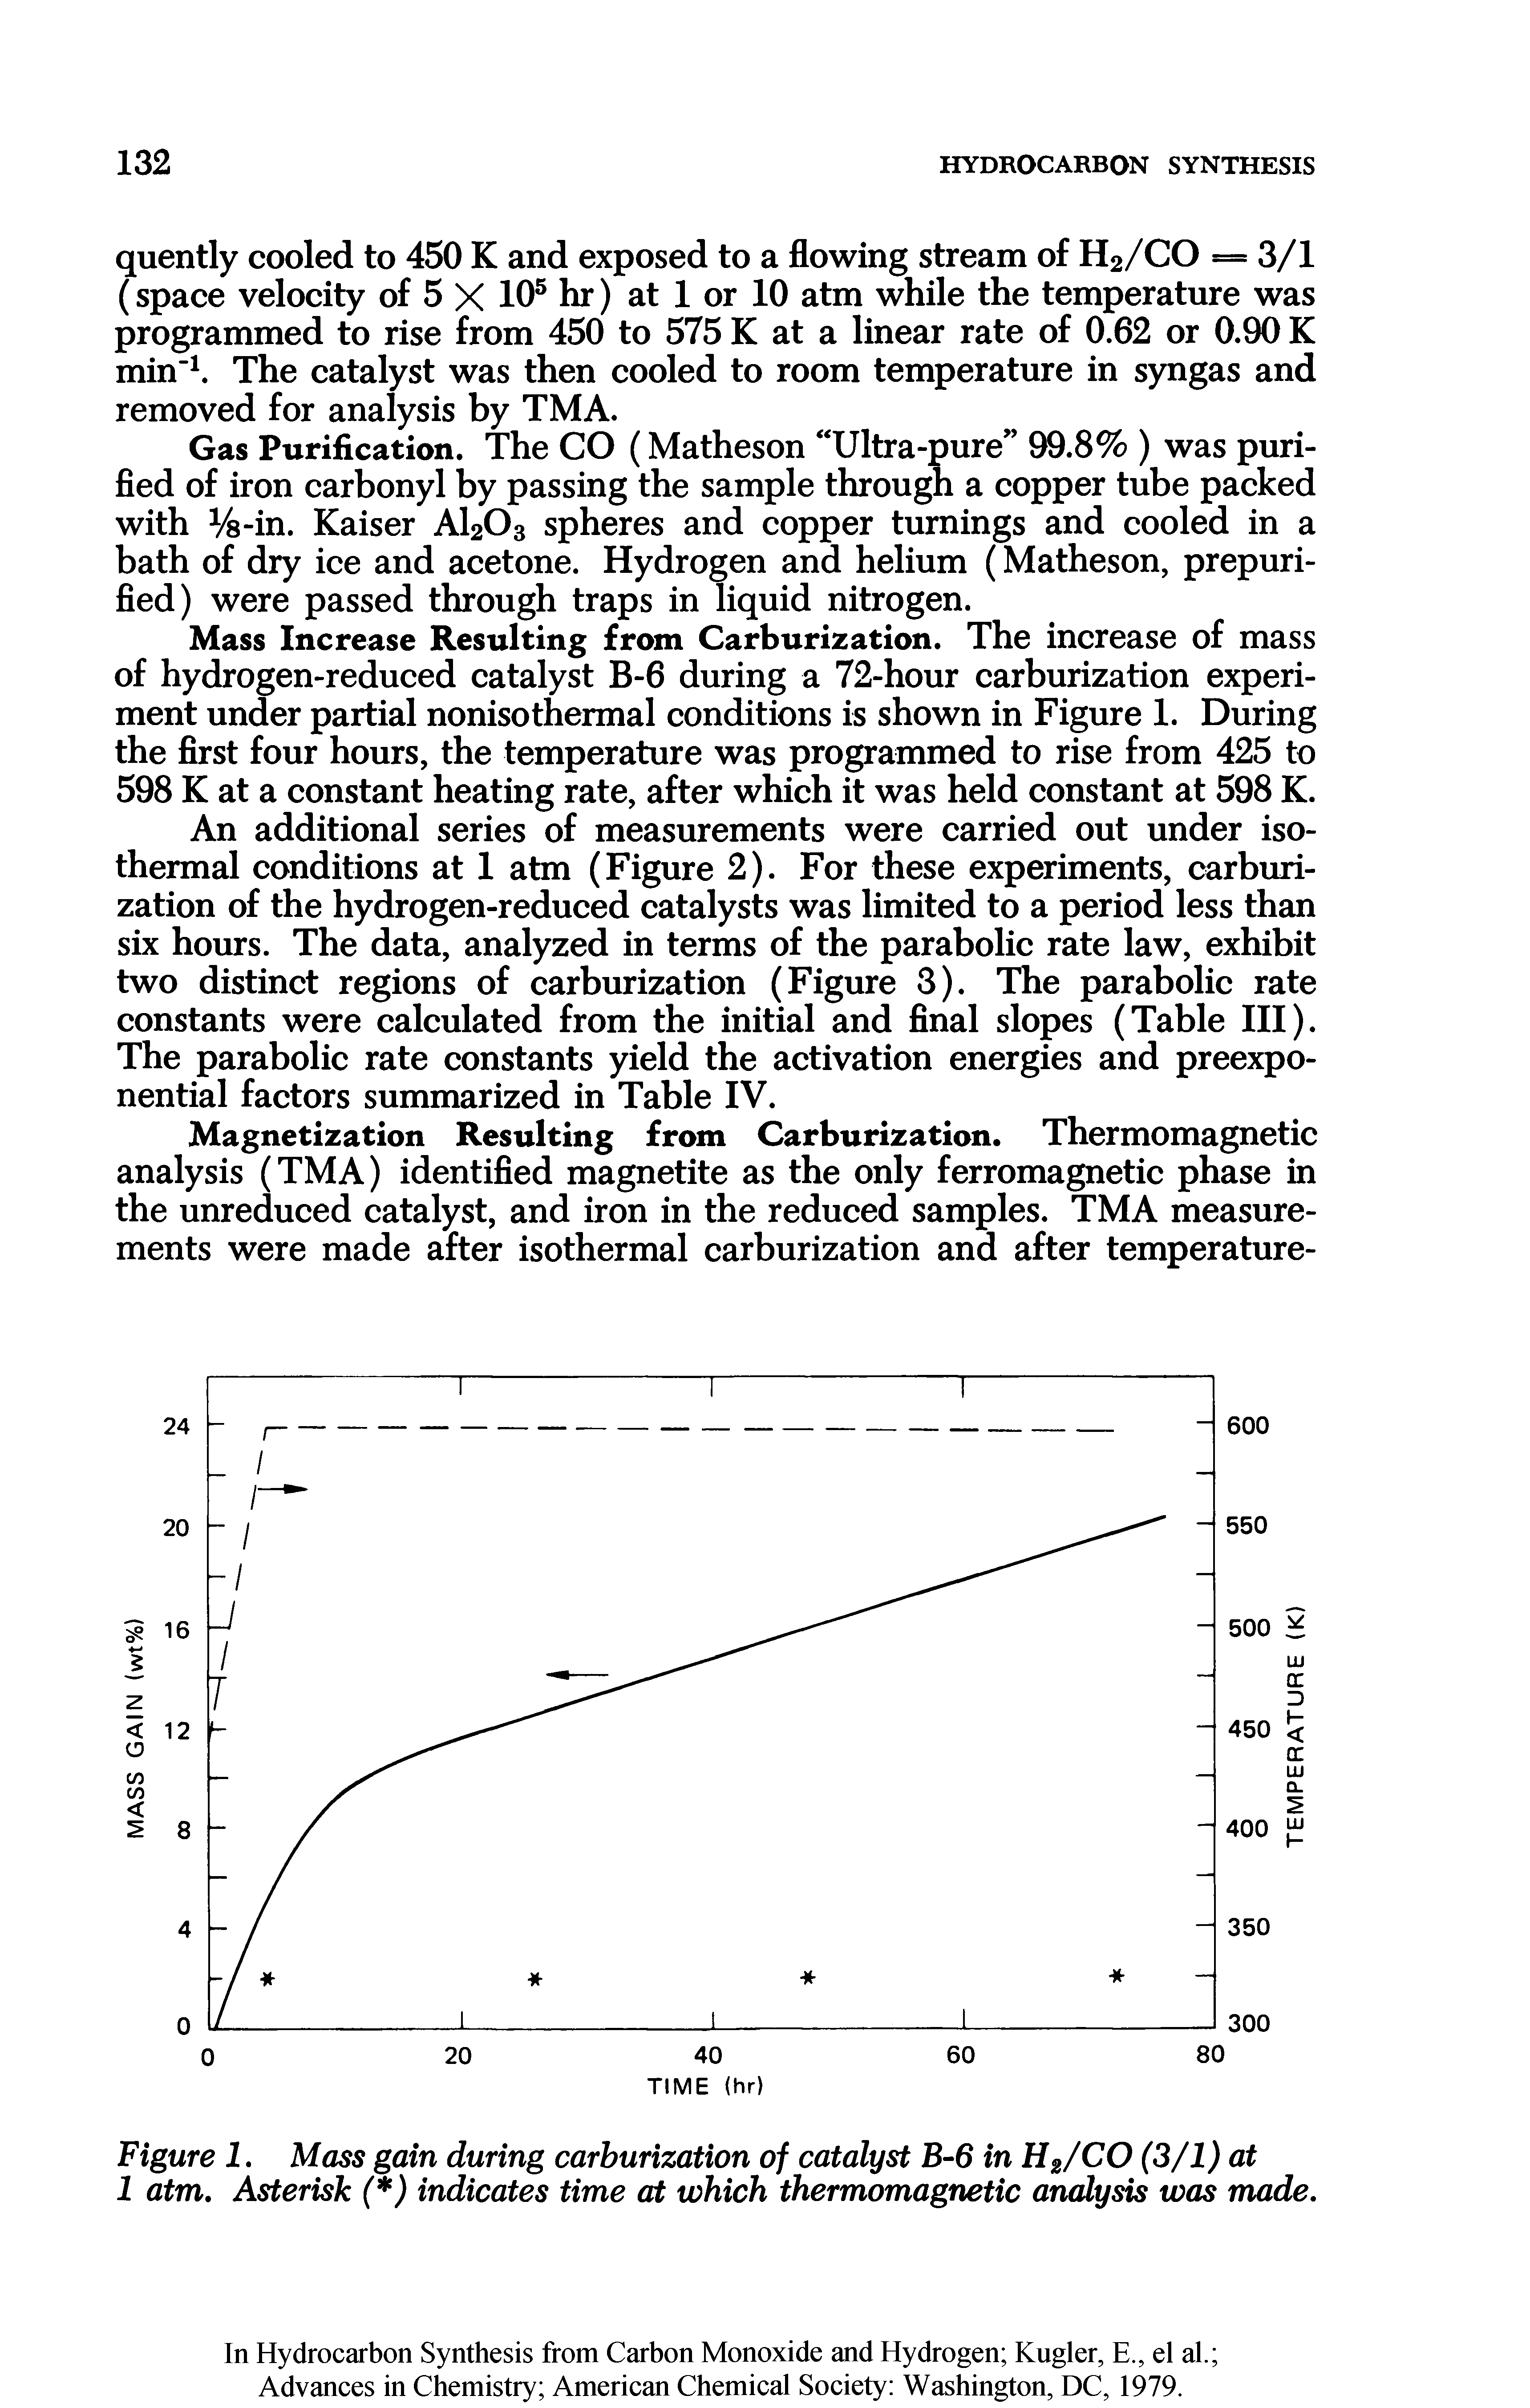 Figure 1. Mass gain during carburization of catalyst B-6 in H2/CO (3/1) at 1 atm. Asterisk ( ) indicates time at which thermomagnetic analysis was made.